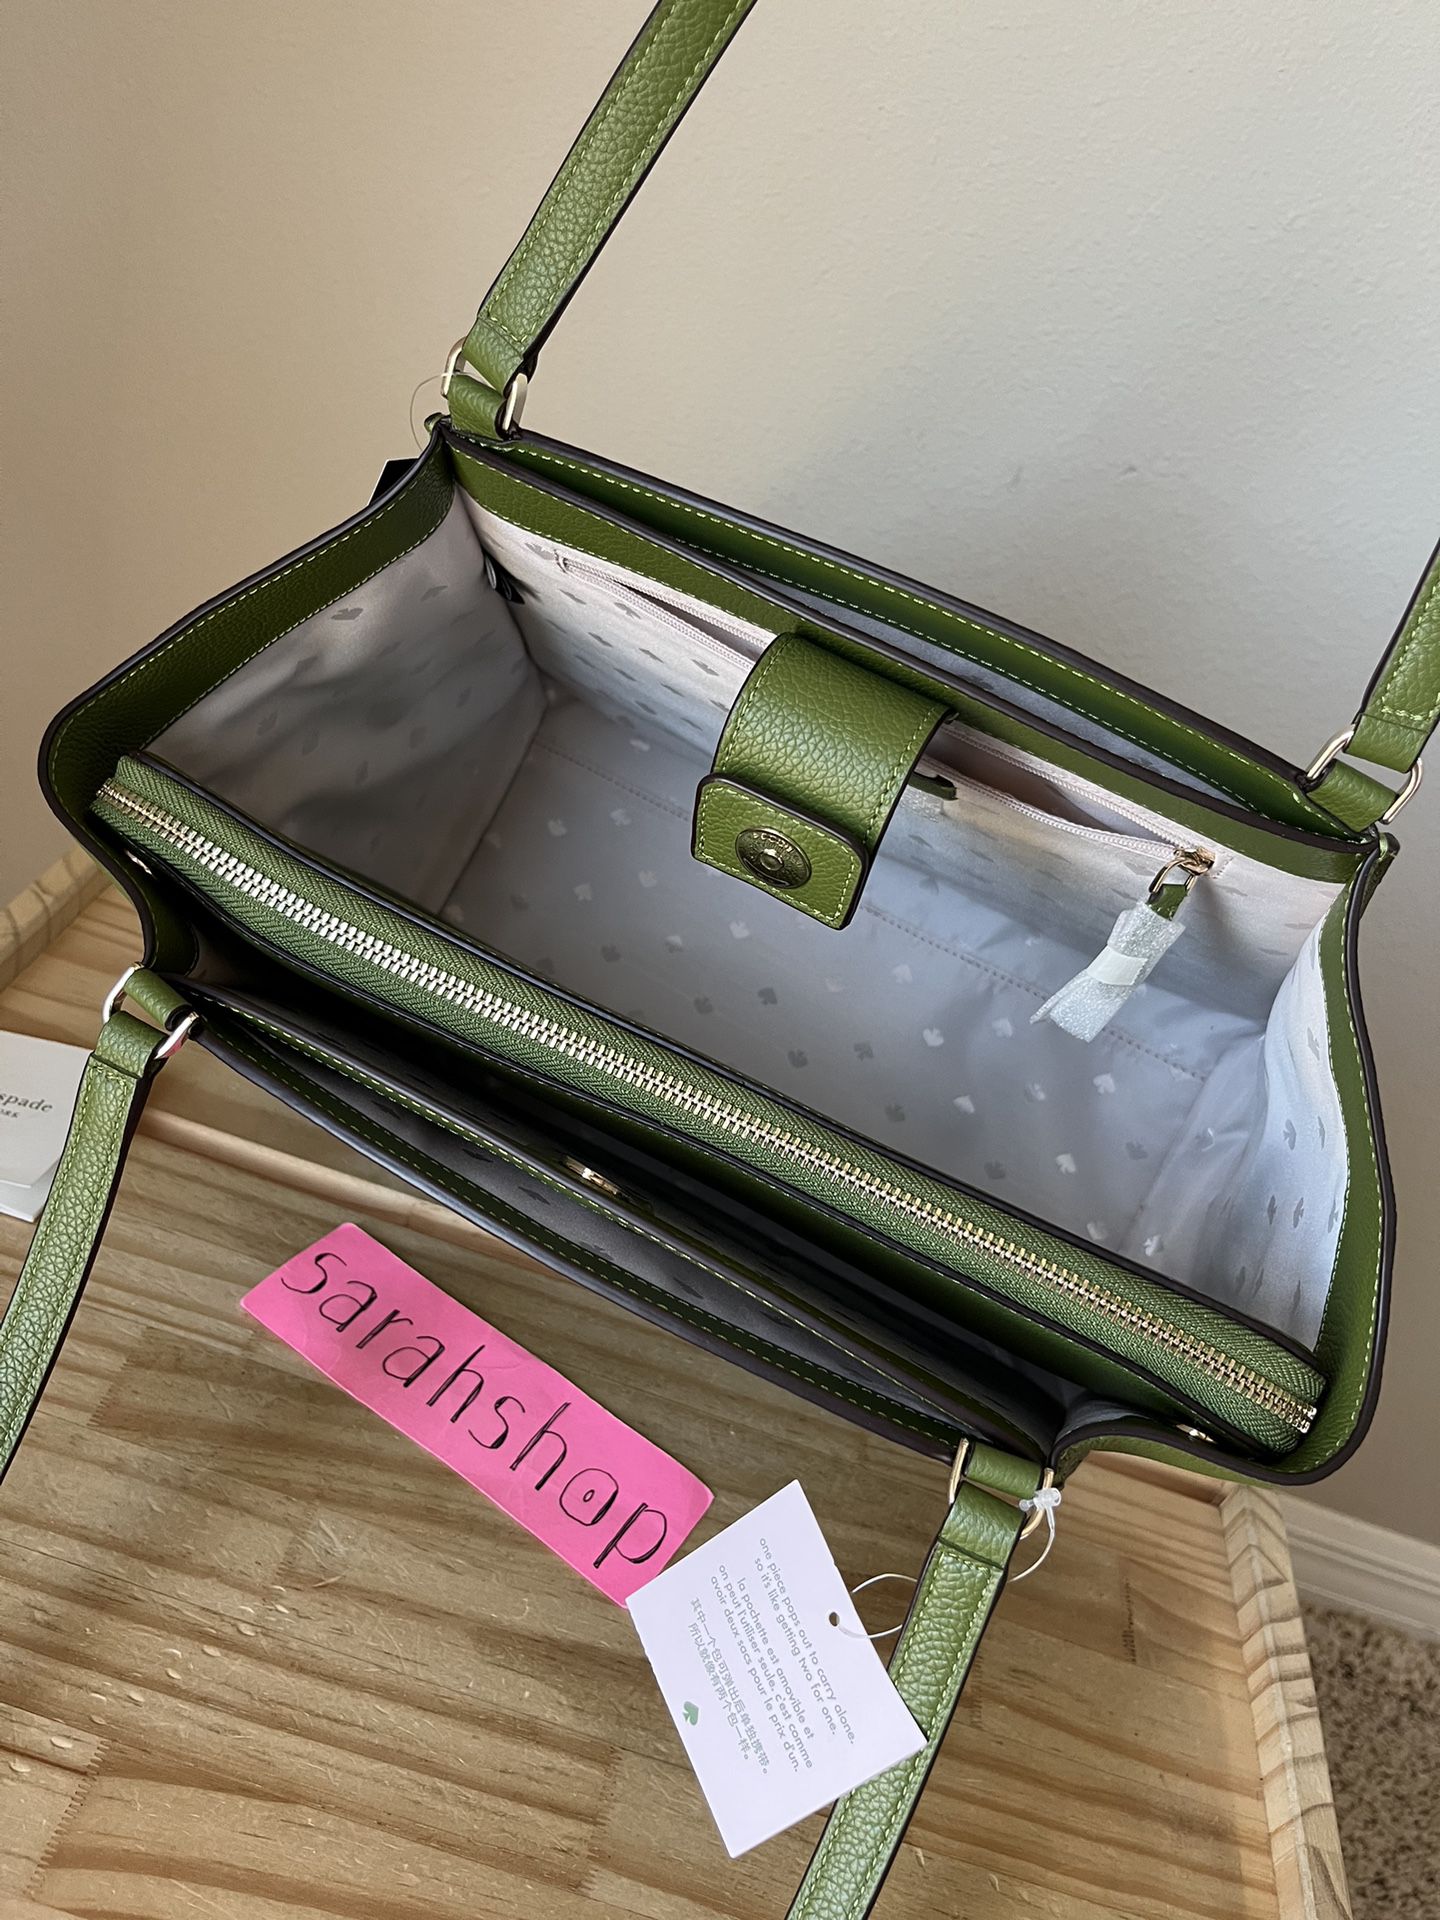 Kate Spade Leila Large Flap Backpack for Sale in Orland Park, IL - OfferUp